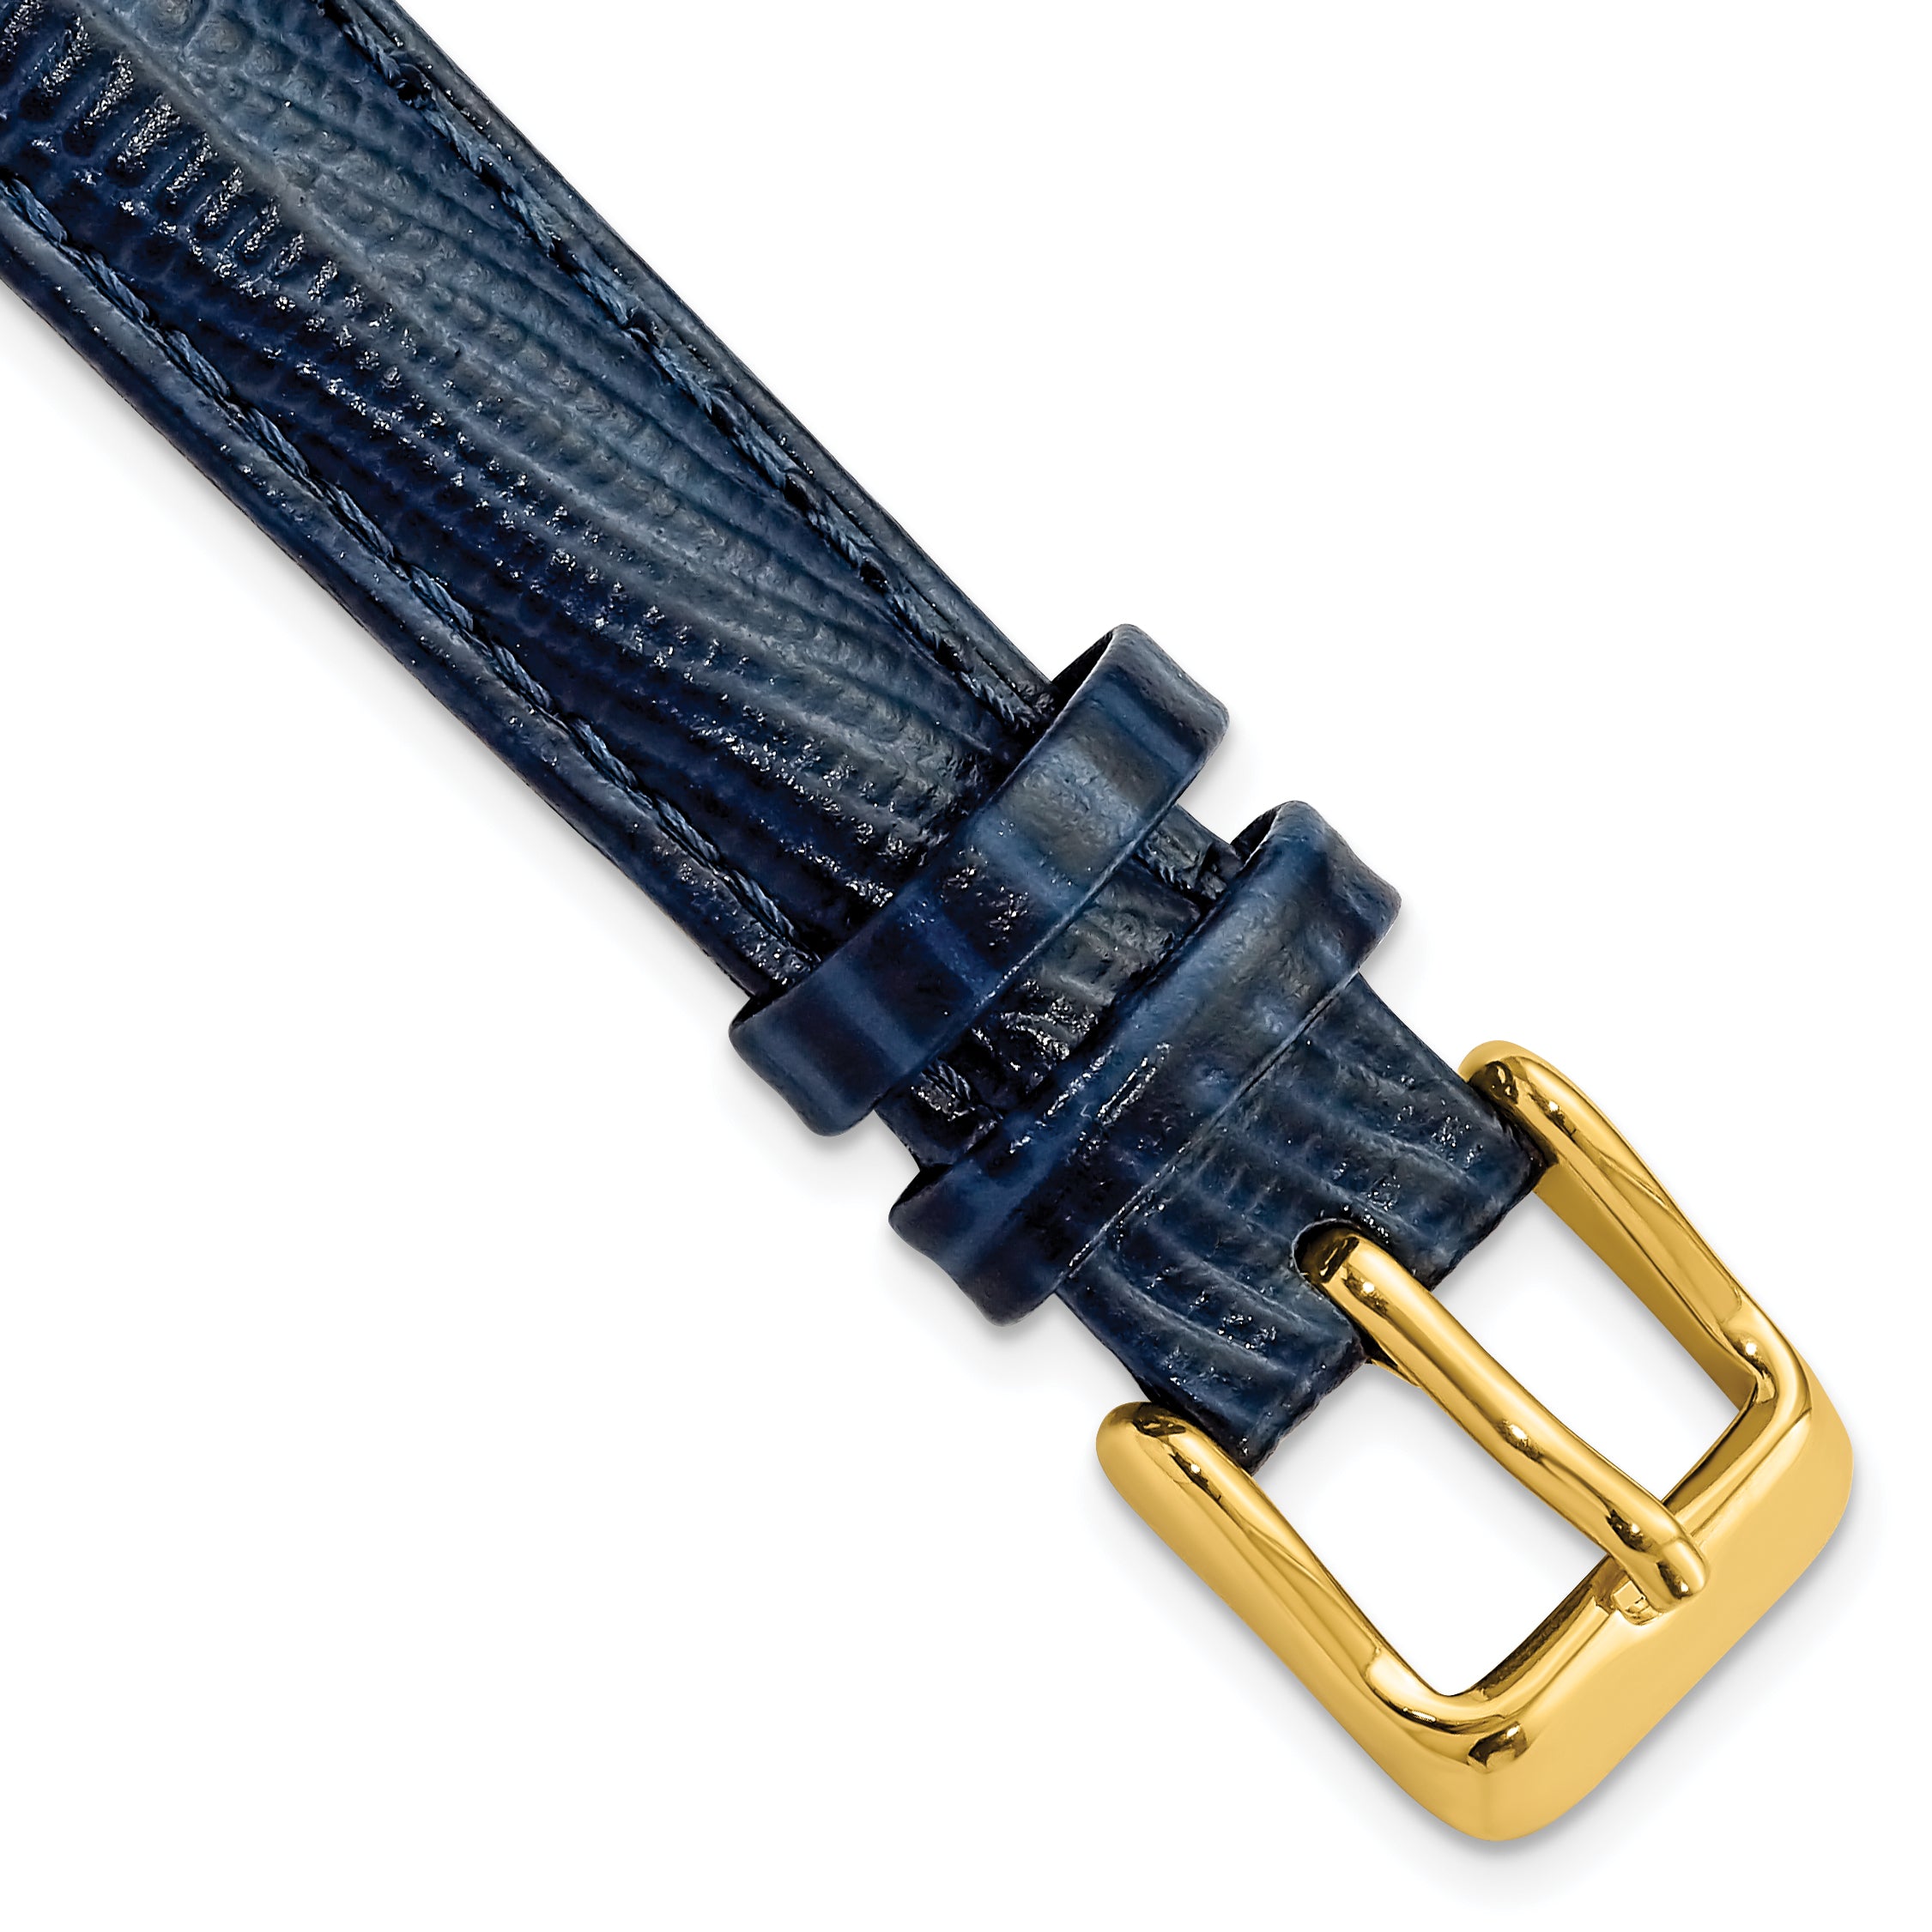 DeBeer 14mm Navy Teju Liz Grain Leather with Gold-tone Buckle 6.75 inch Watch Band